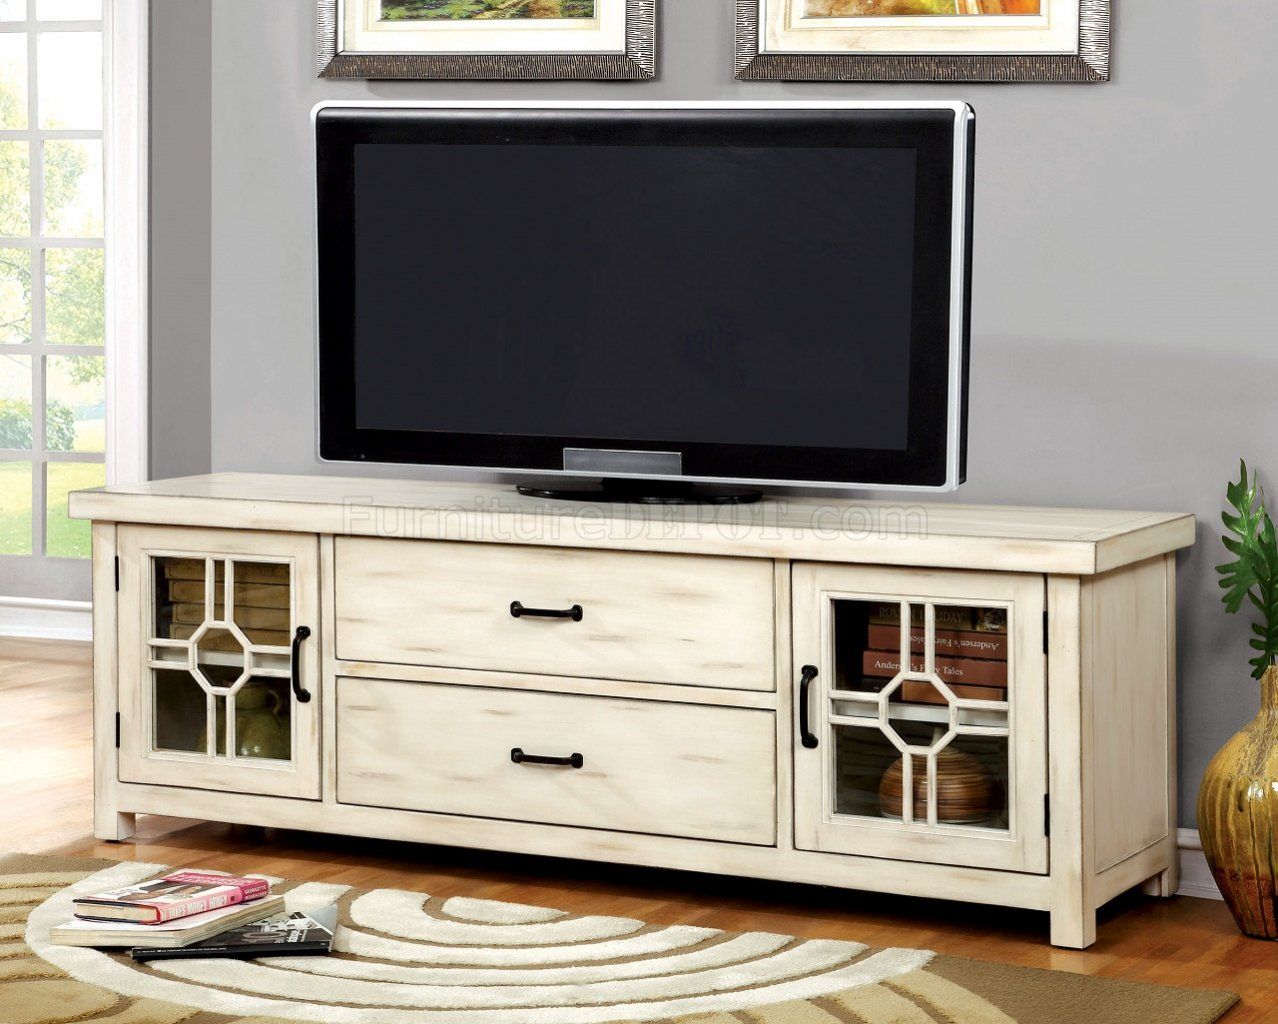 Ridley Cm5230 Tv Console In Antique Style White W/optional Throughout Alden Design Wooden Tv Stands With Storage Cabinet Espresso (Photo 4 of 15)